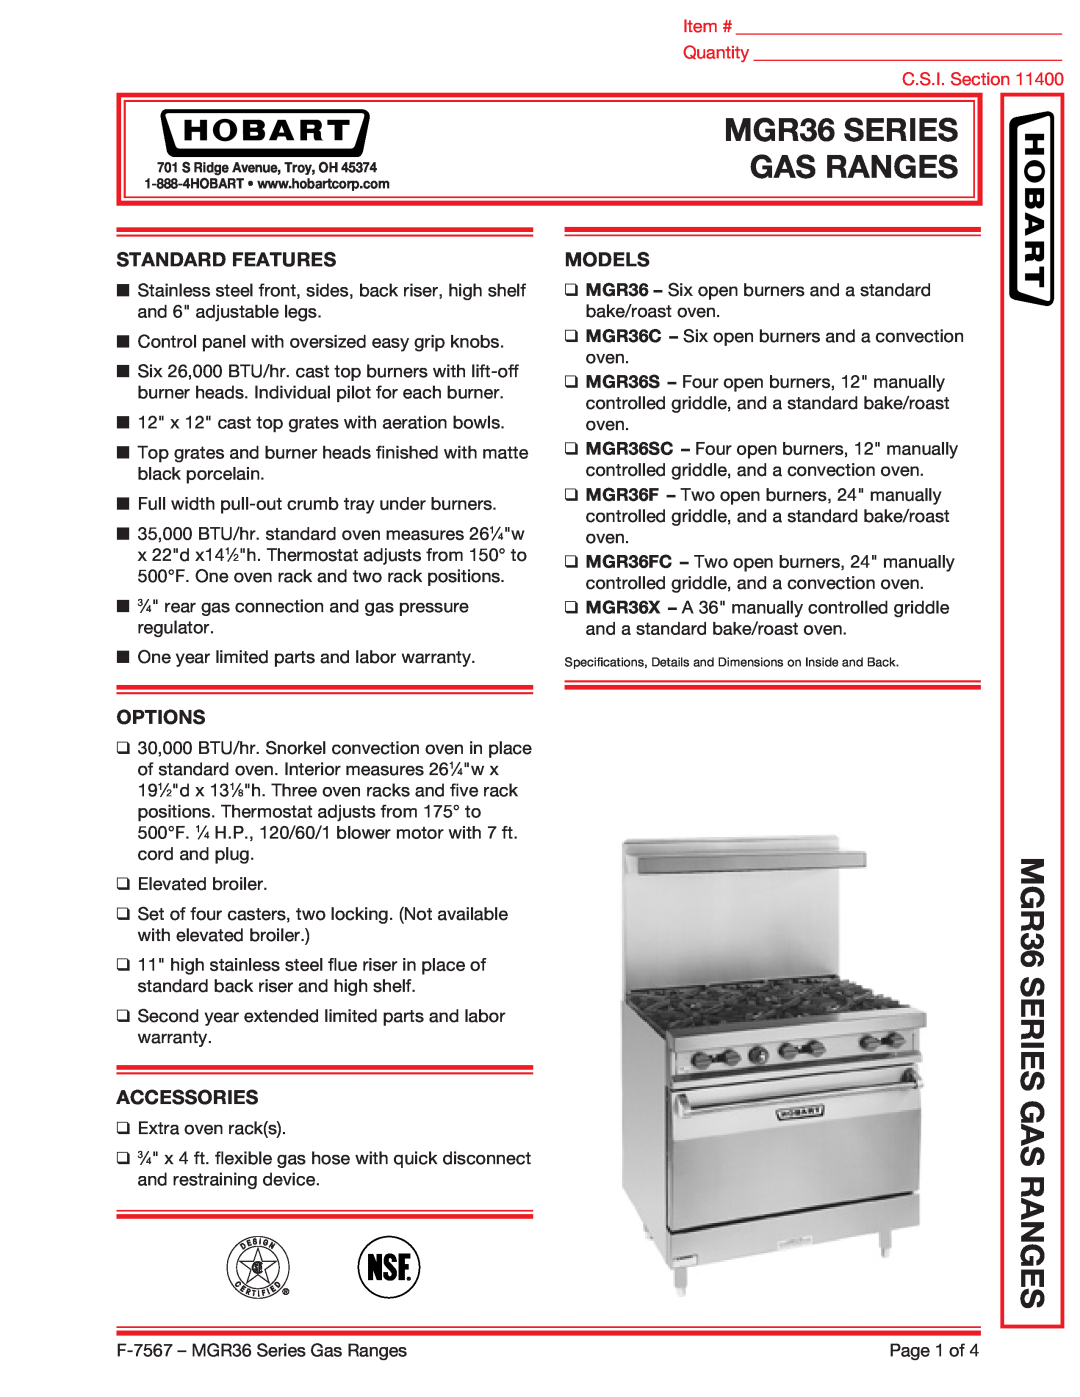 Hobart MGR36SC specifications Gas Ranges, MGR36 SERIES GAS RANGES, Standard Features, Models, Options, Accessories 